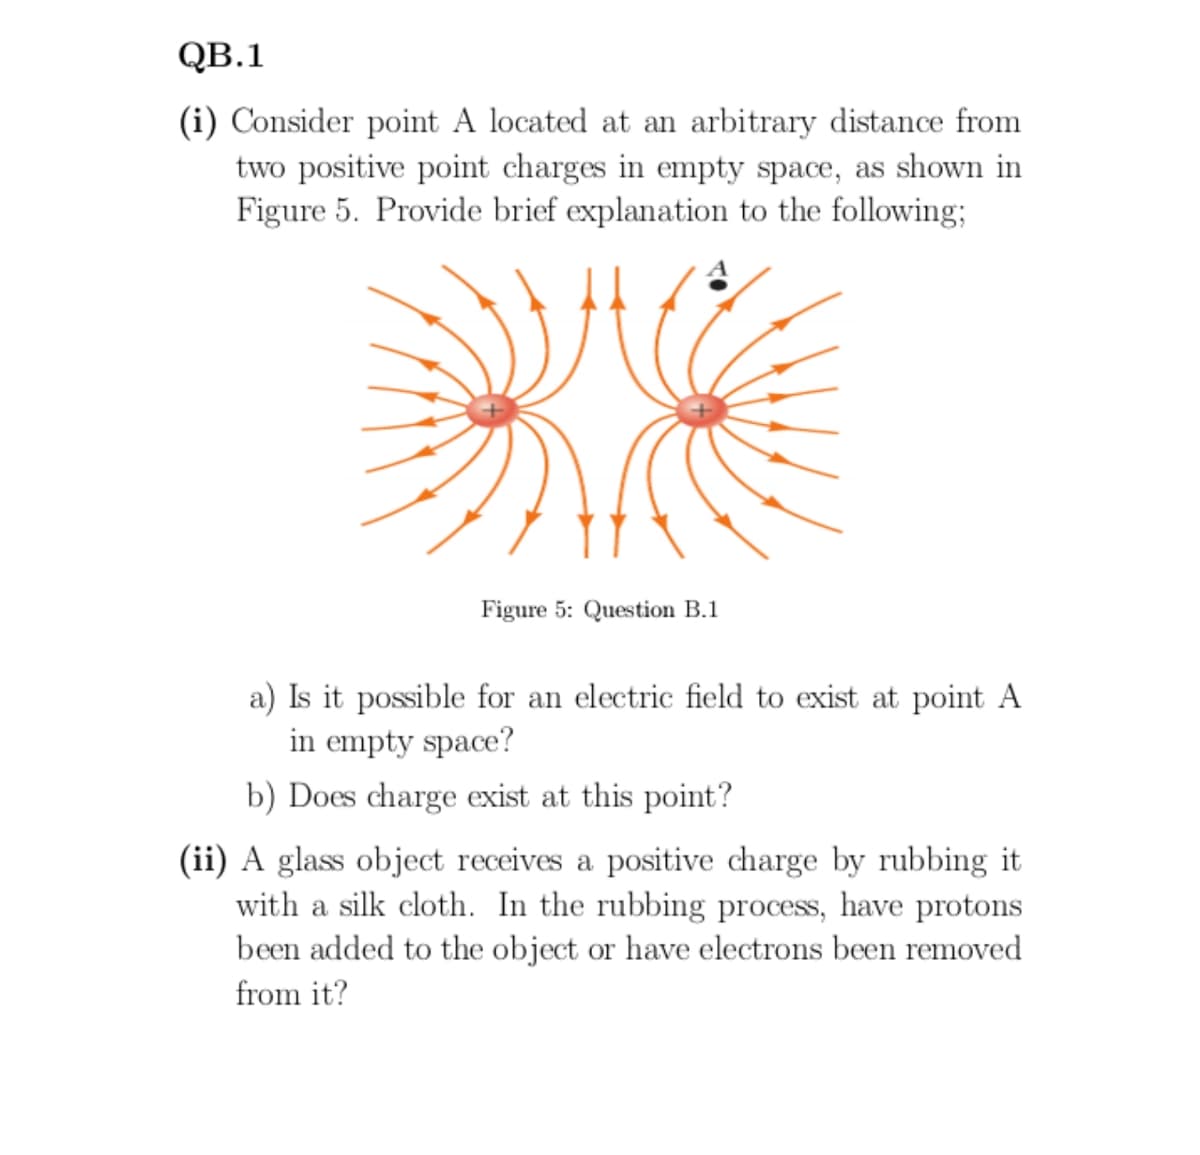 QB.1
(i) Consider point A located at an arbitrary distance from
two positive point charges in empty space, as shown in
Figure 5. Provide brief explanation to the following;
Figure 5: Question B.1
a) Is it possible for an electric field to exist at point A
in empty space?
b) Does charge exist at this point?
(ii) A glass object receives a positive charge by rubbing it
with a silk cloth. In the rubbing process, have protons
been added to the object or have electrons been removed
from it?